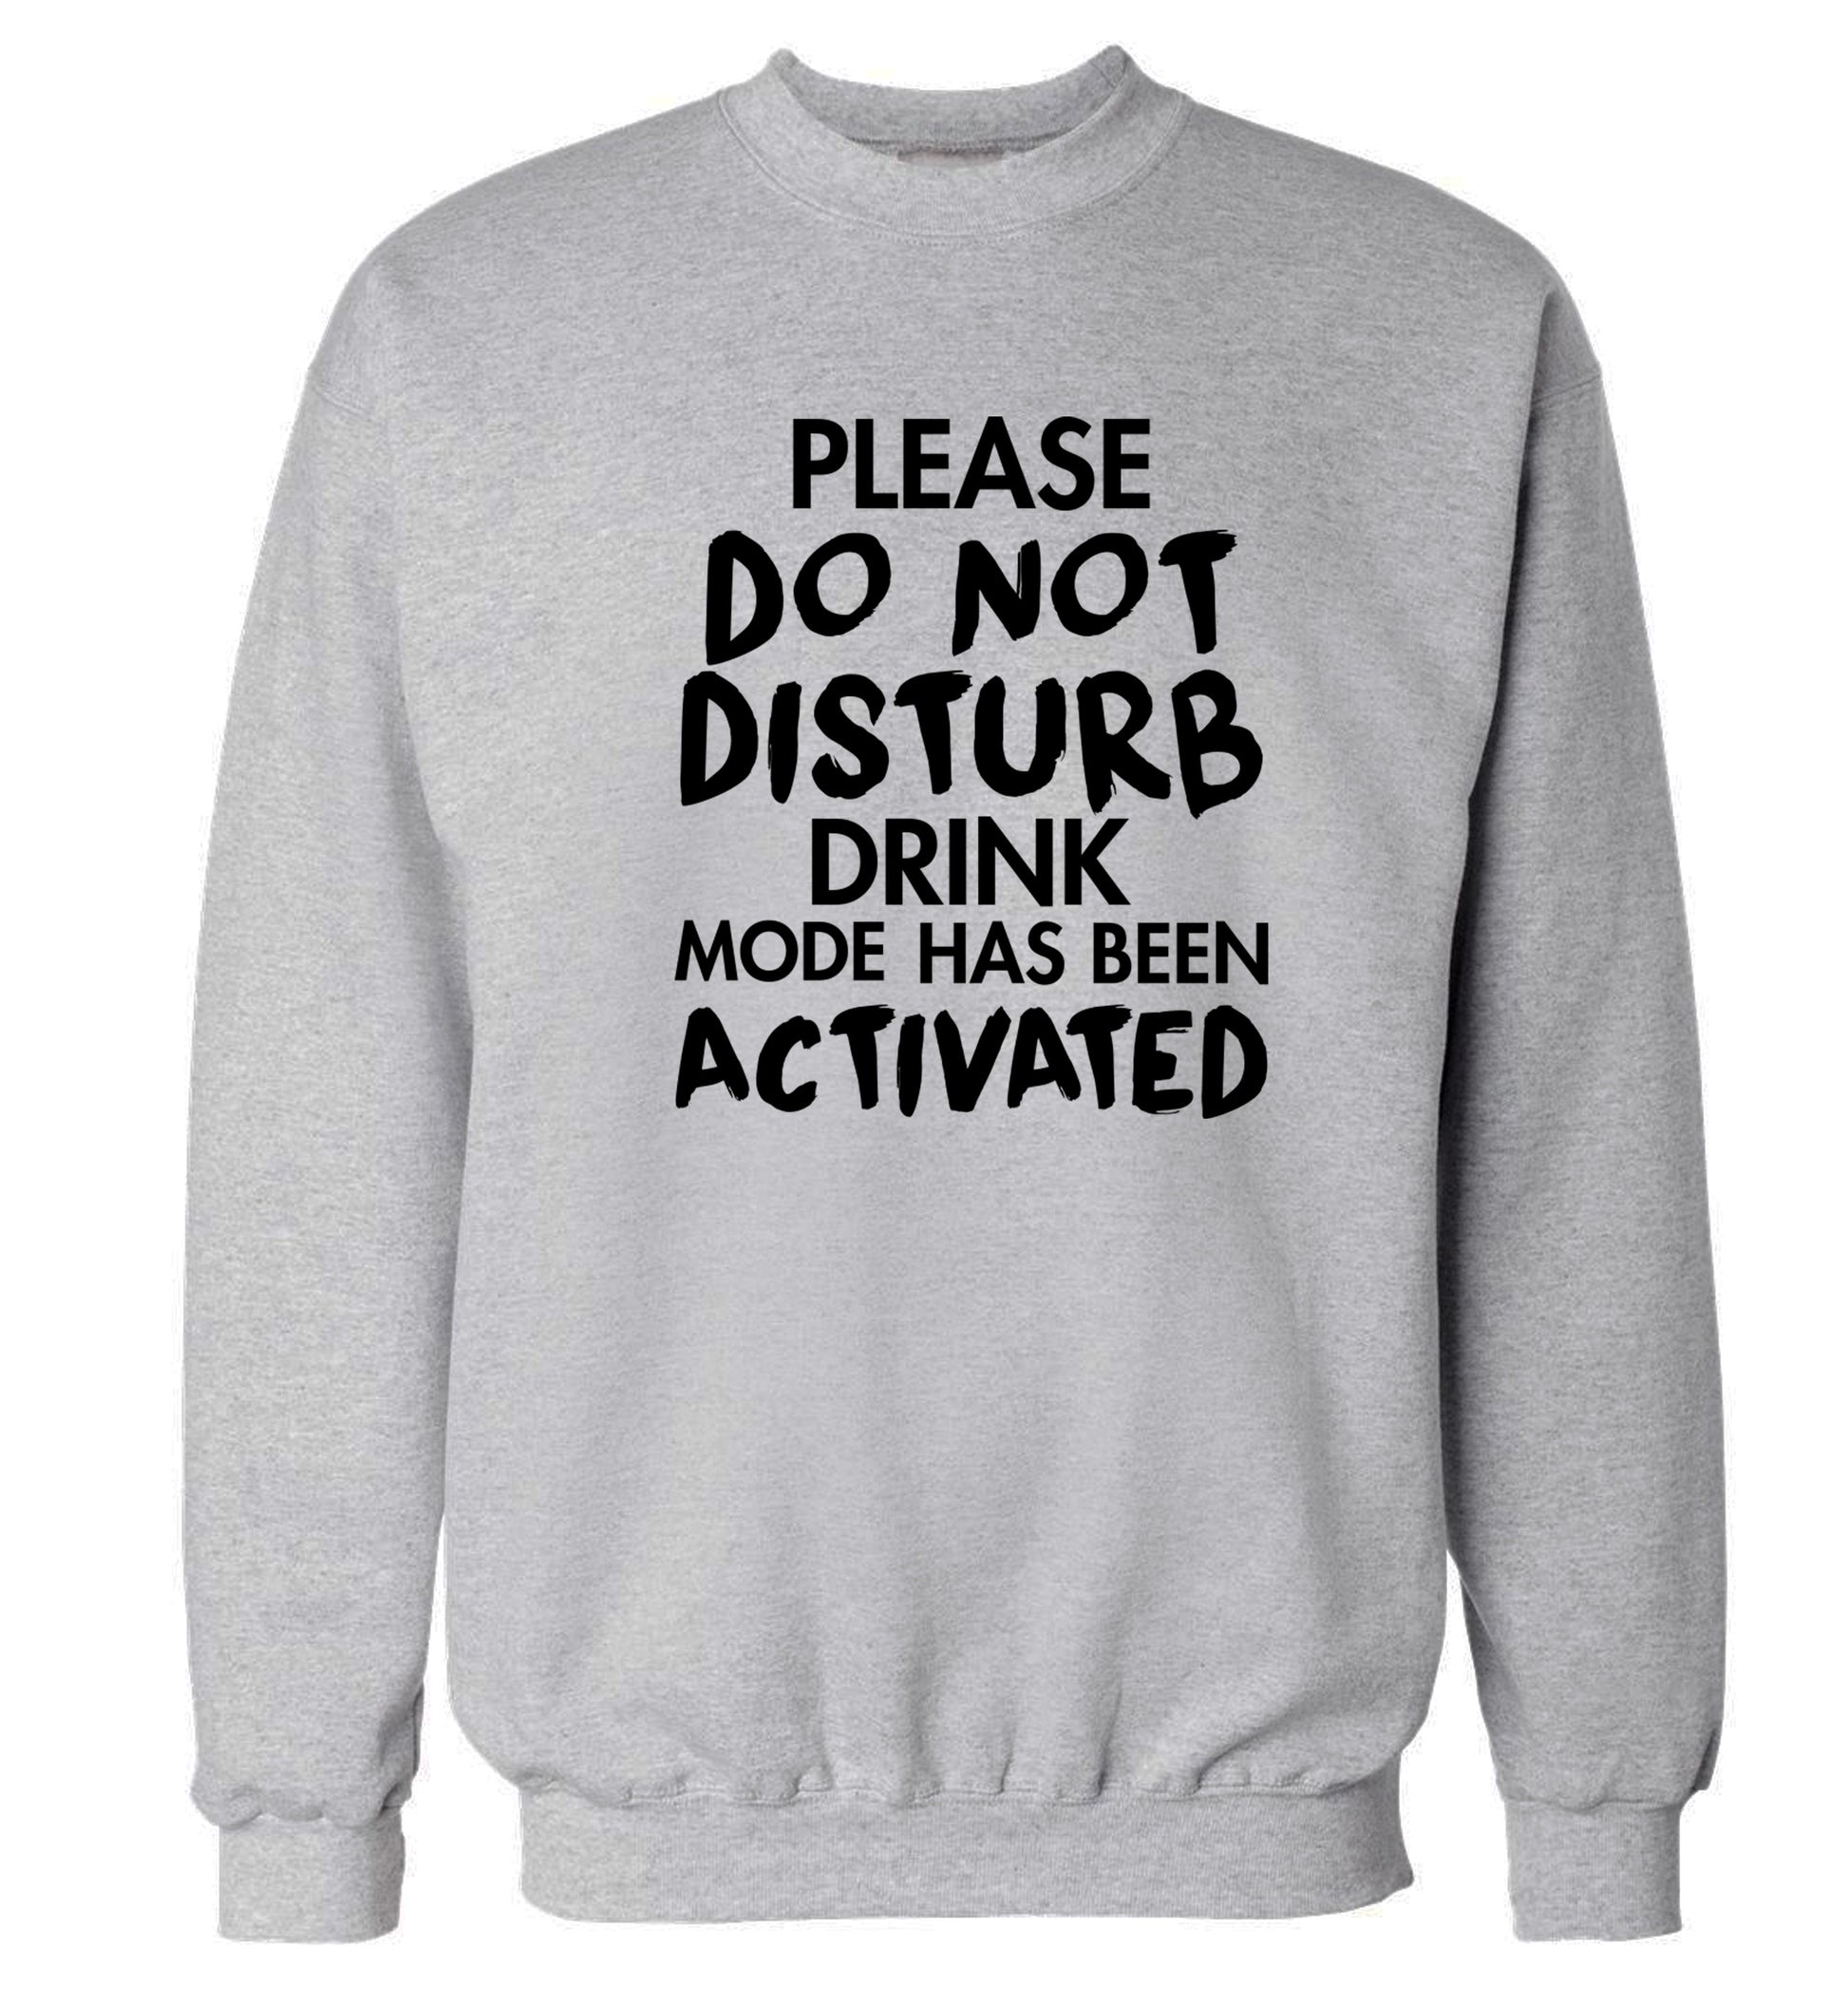 Please do not disturb drink mode has been activated Adult's unisex grey Sweater 2XL